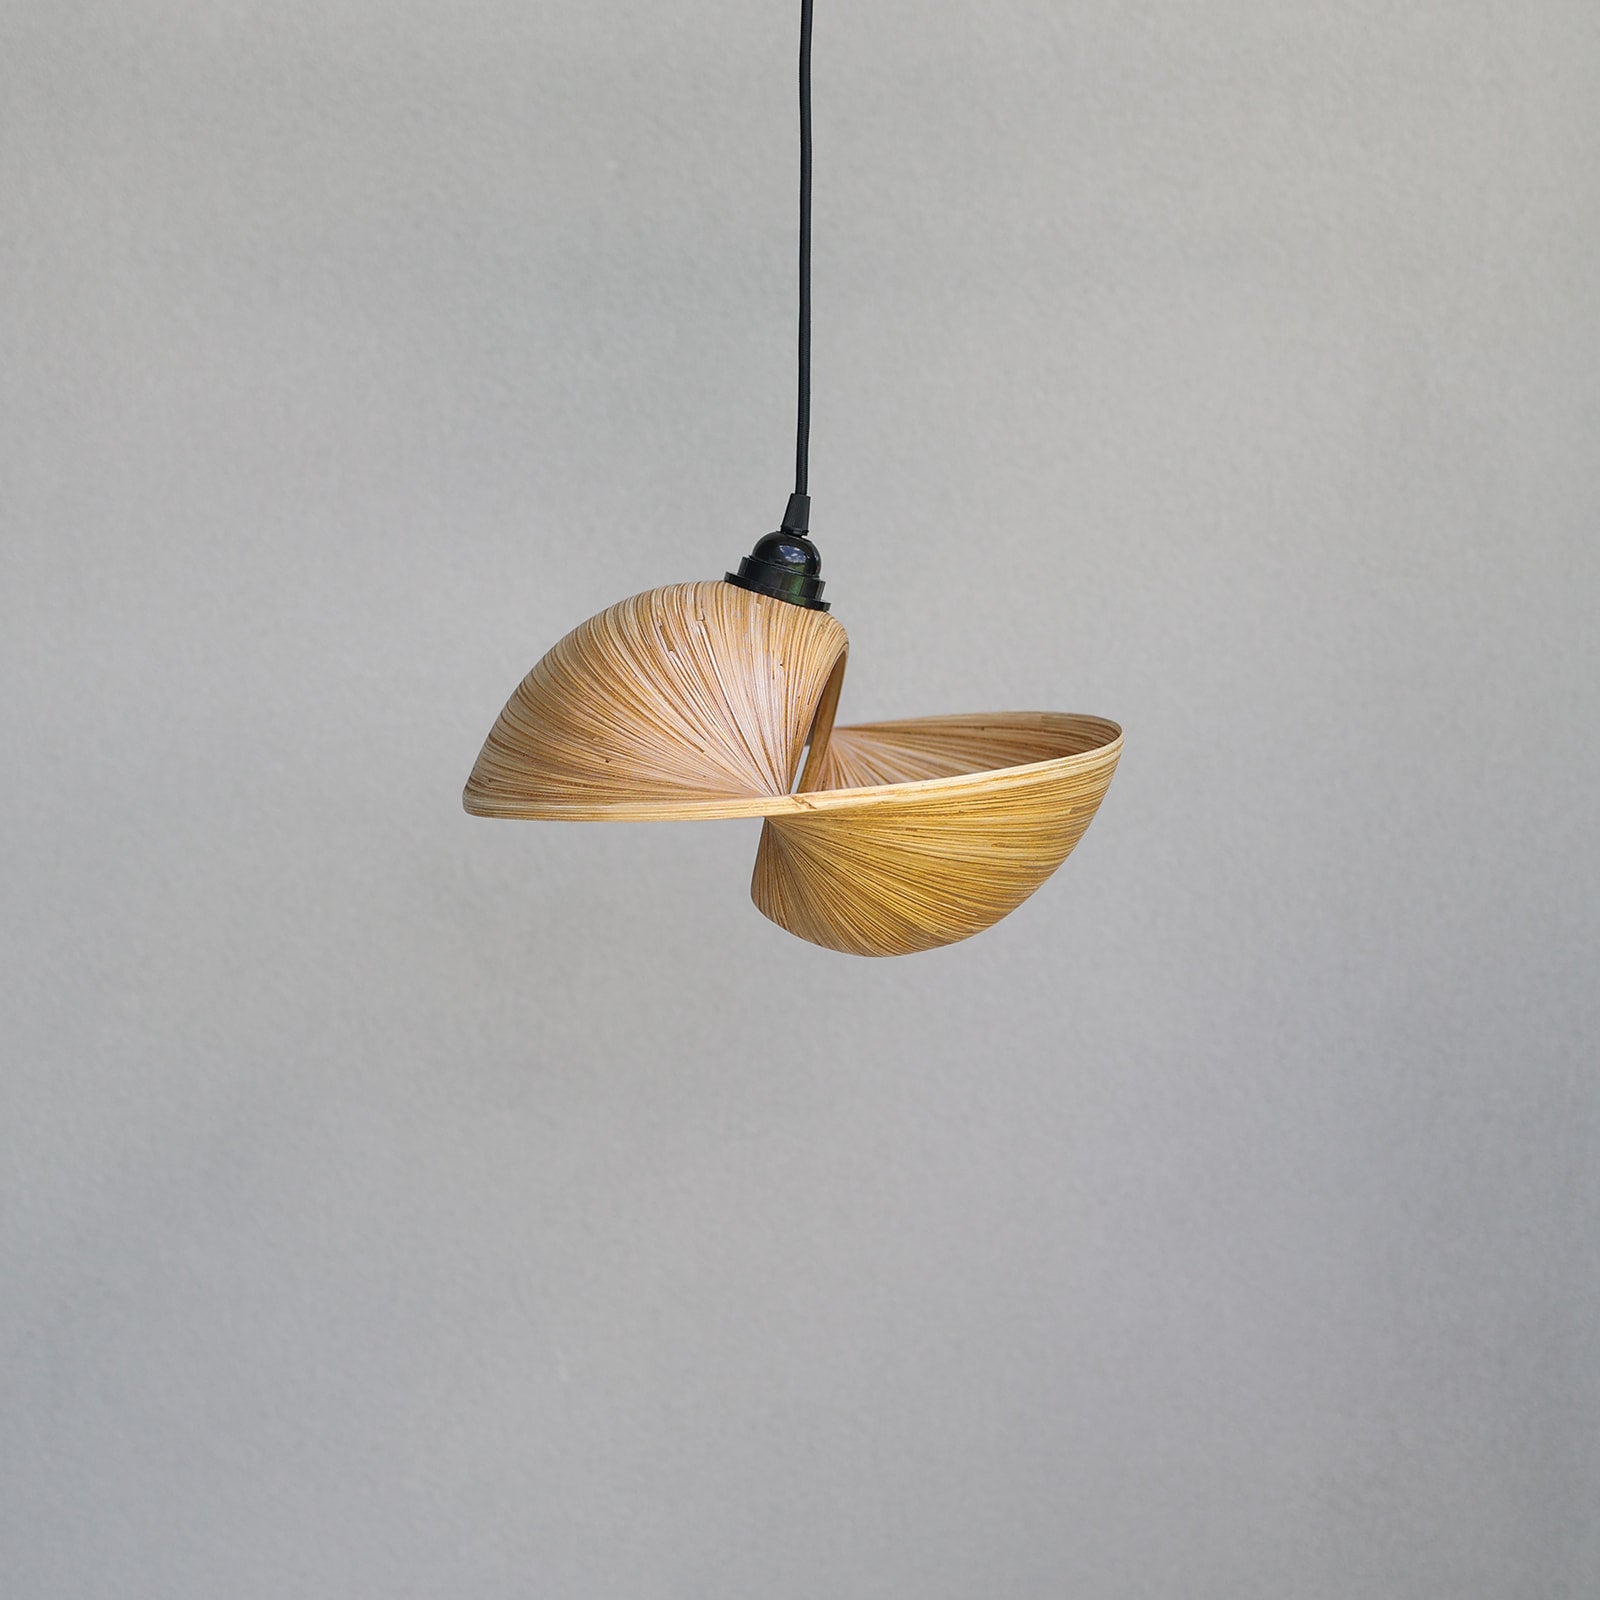 small-bamboo-pendant-light-shade-made-from-thin-strips-of-bamboo-to-look-like-a-shell